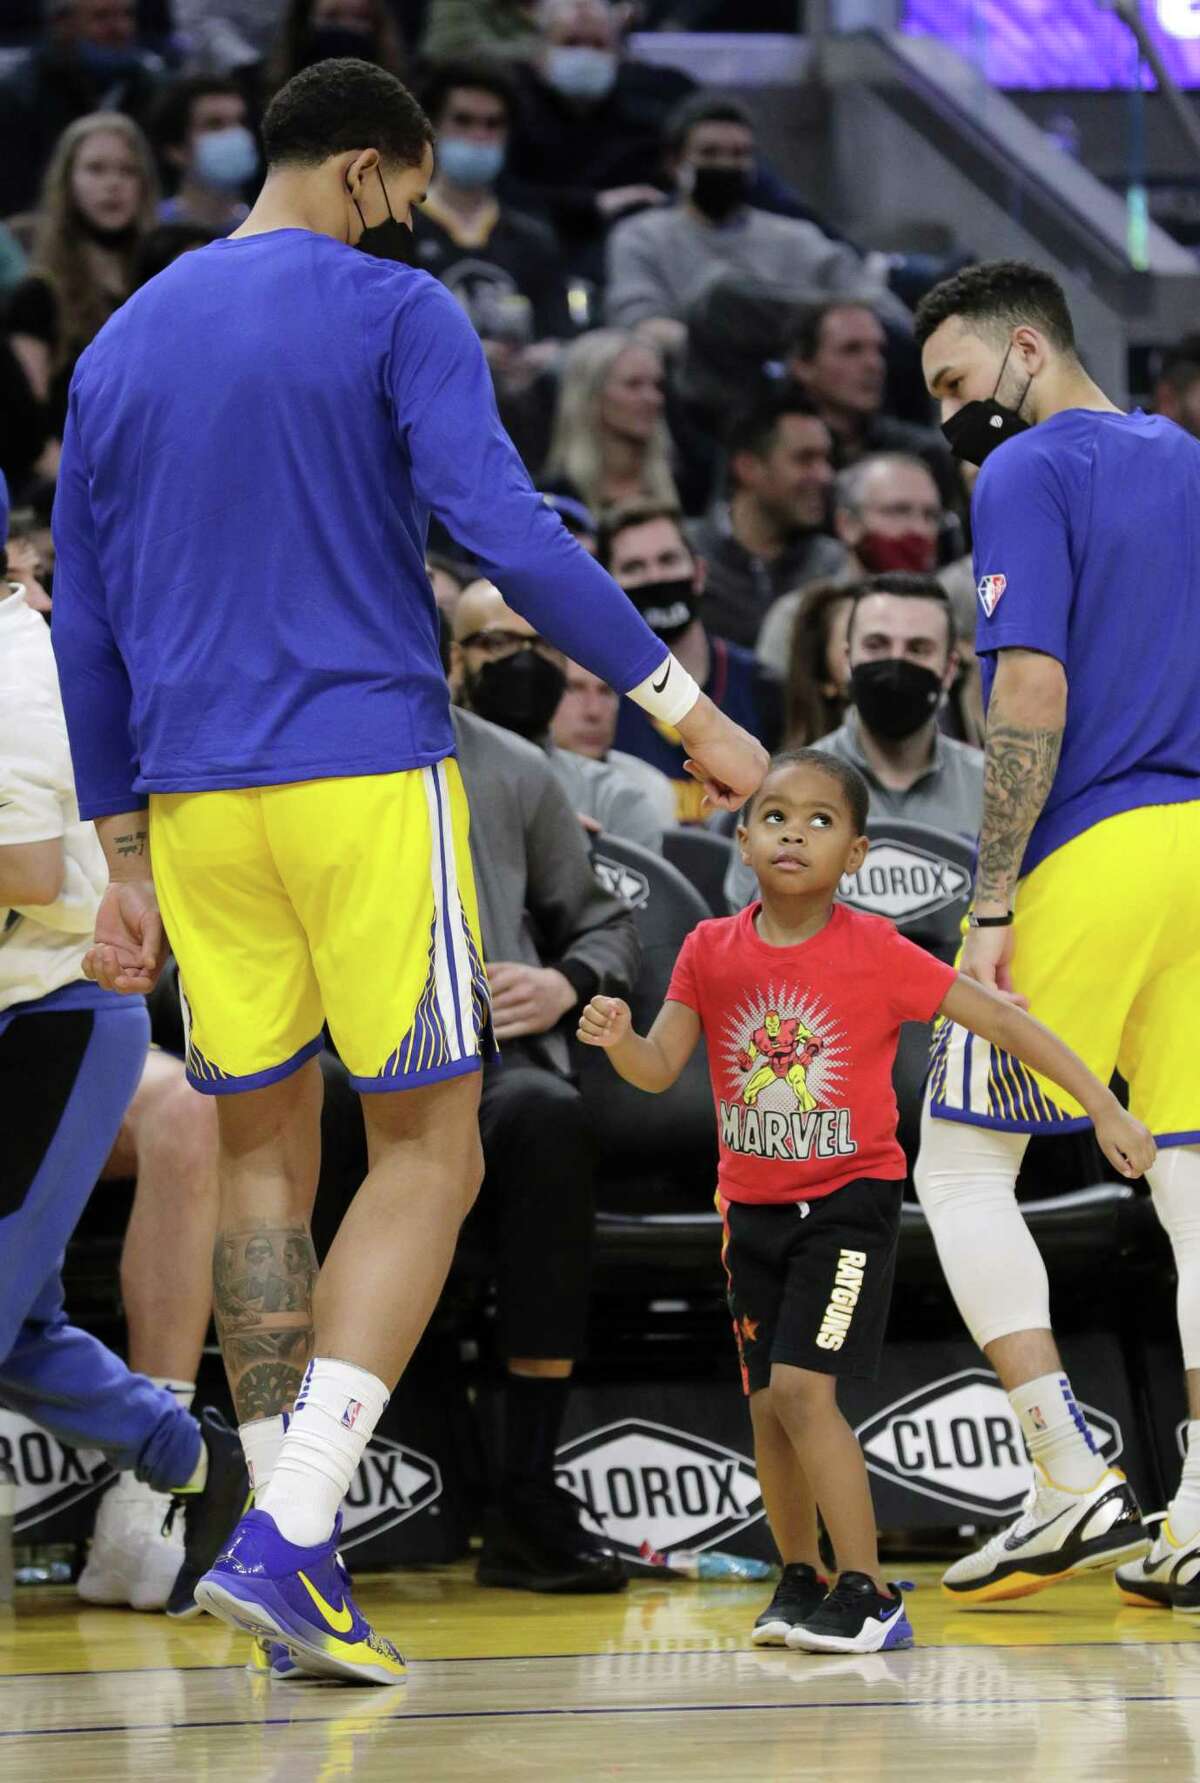 Draymond Jamal Green, 4, dances with Juan Toscano-Anderson during a pause in Monday’s game at Chase Center.